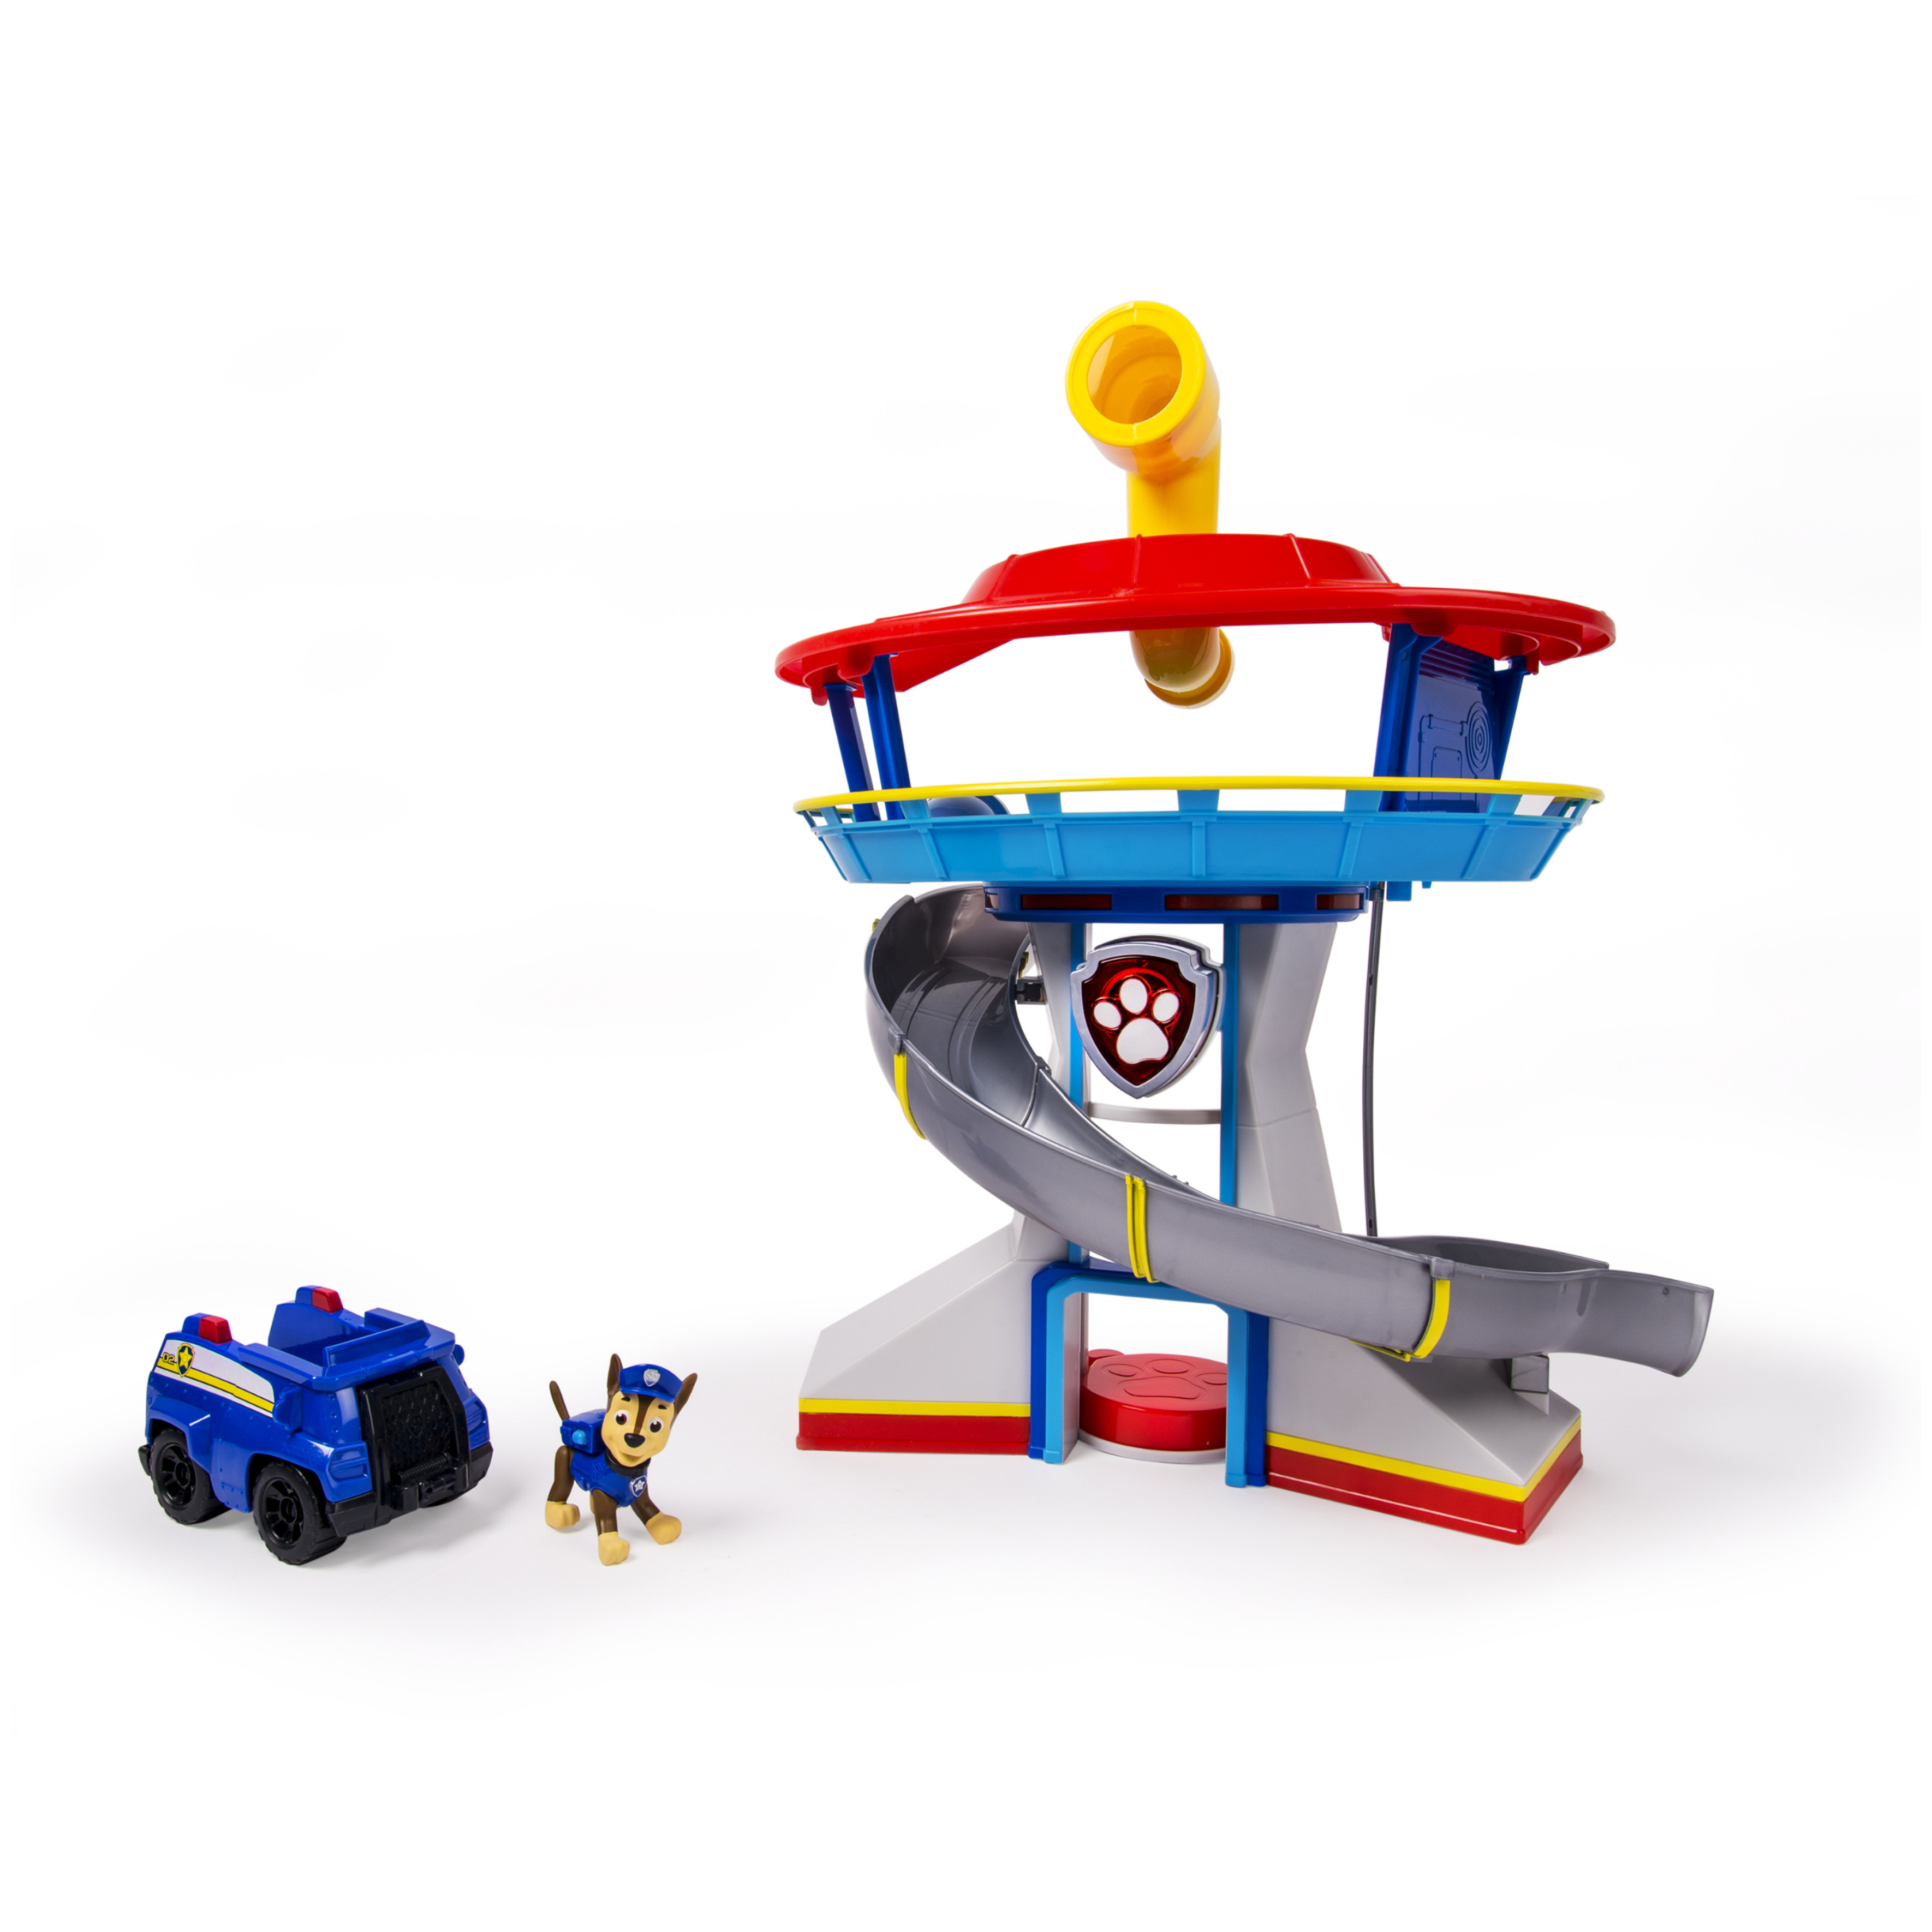 Paw Patrol Look-out Playset, Vehicle and Figure - image 1 of 6